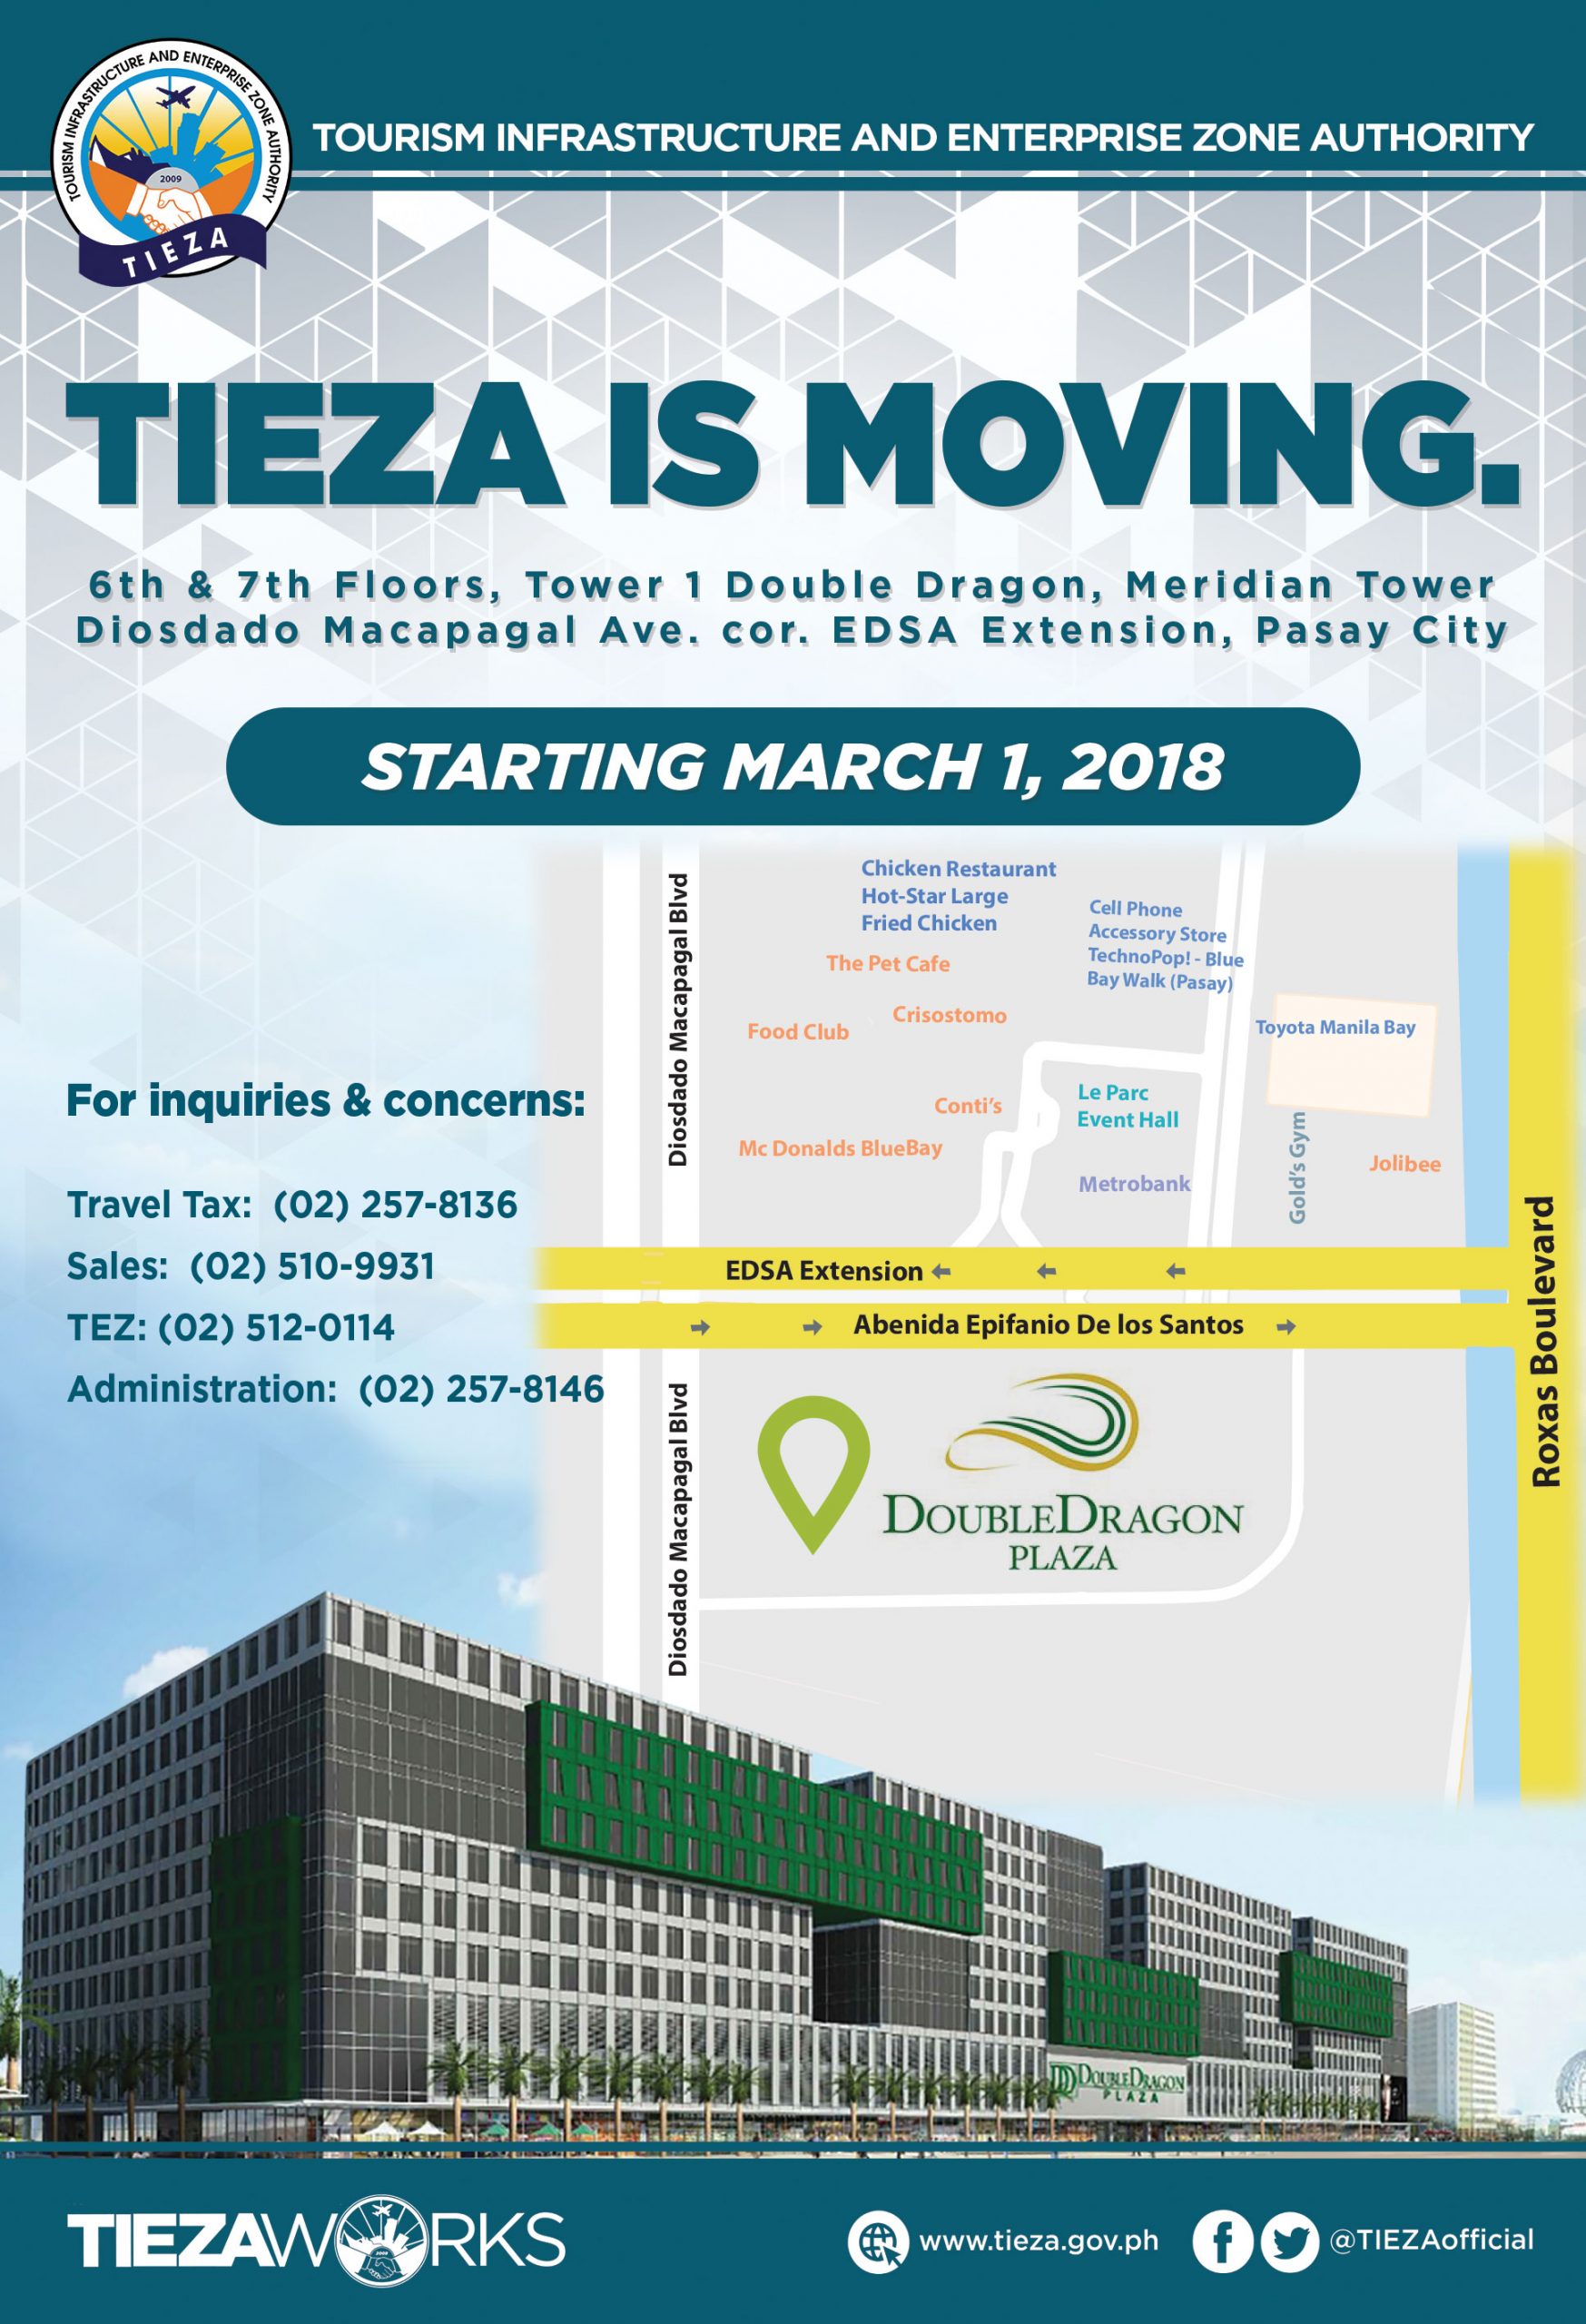 TIEZA IS MOVING